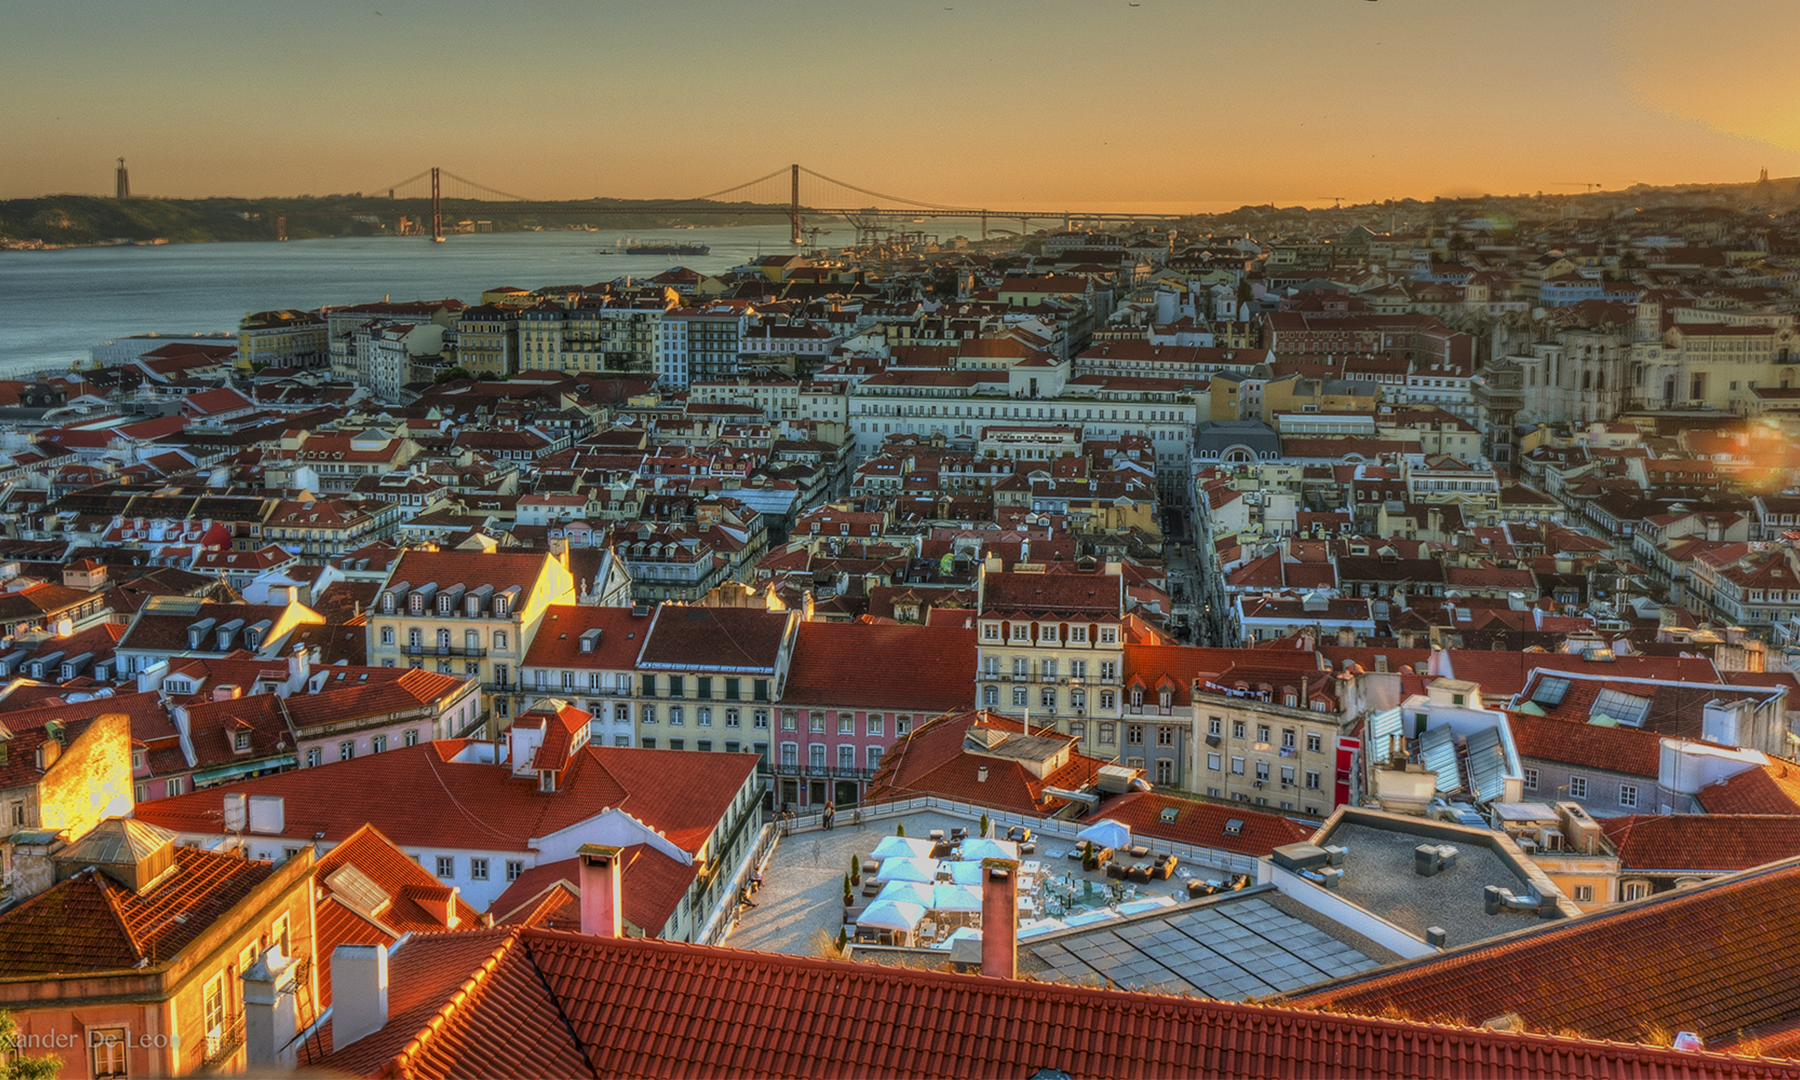 View of the capital city of Lisbon